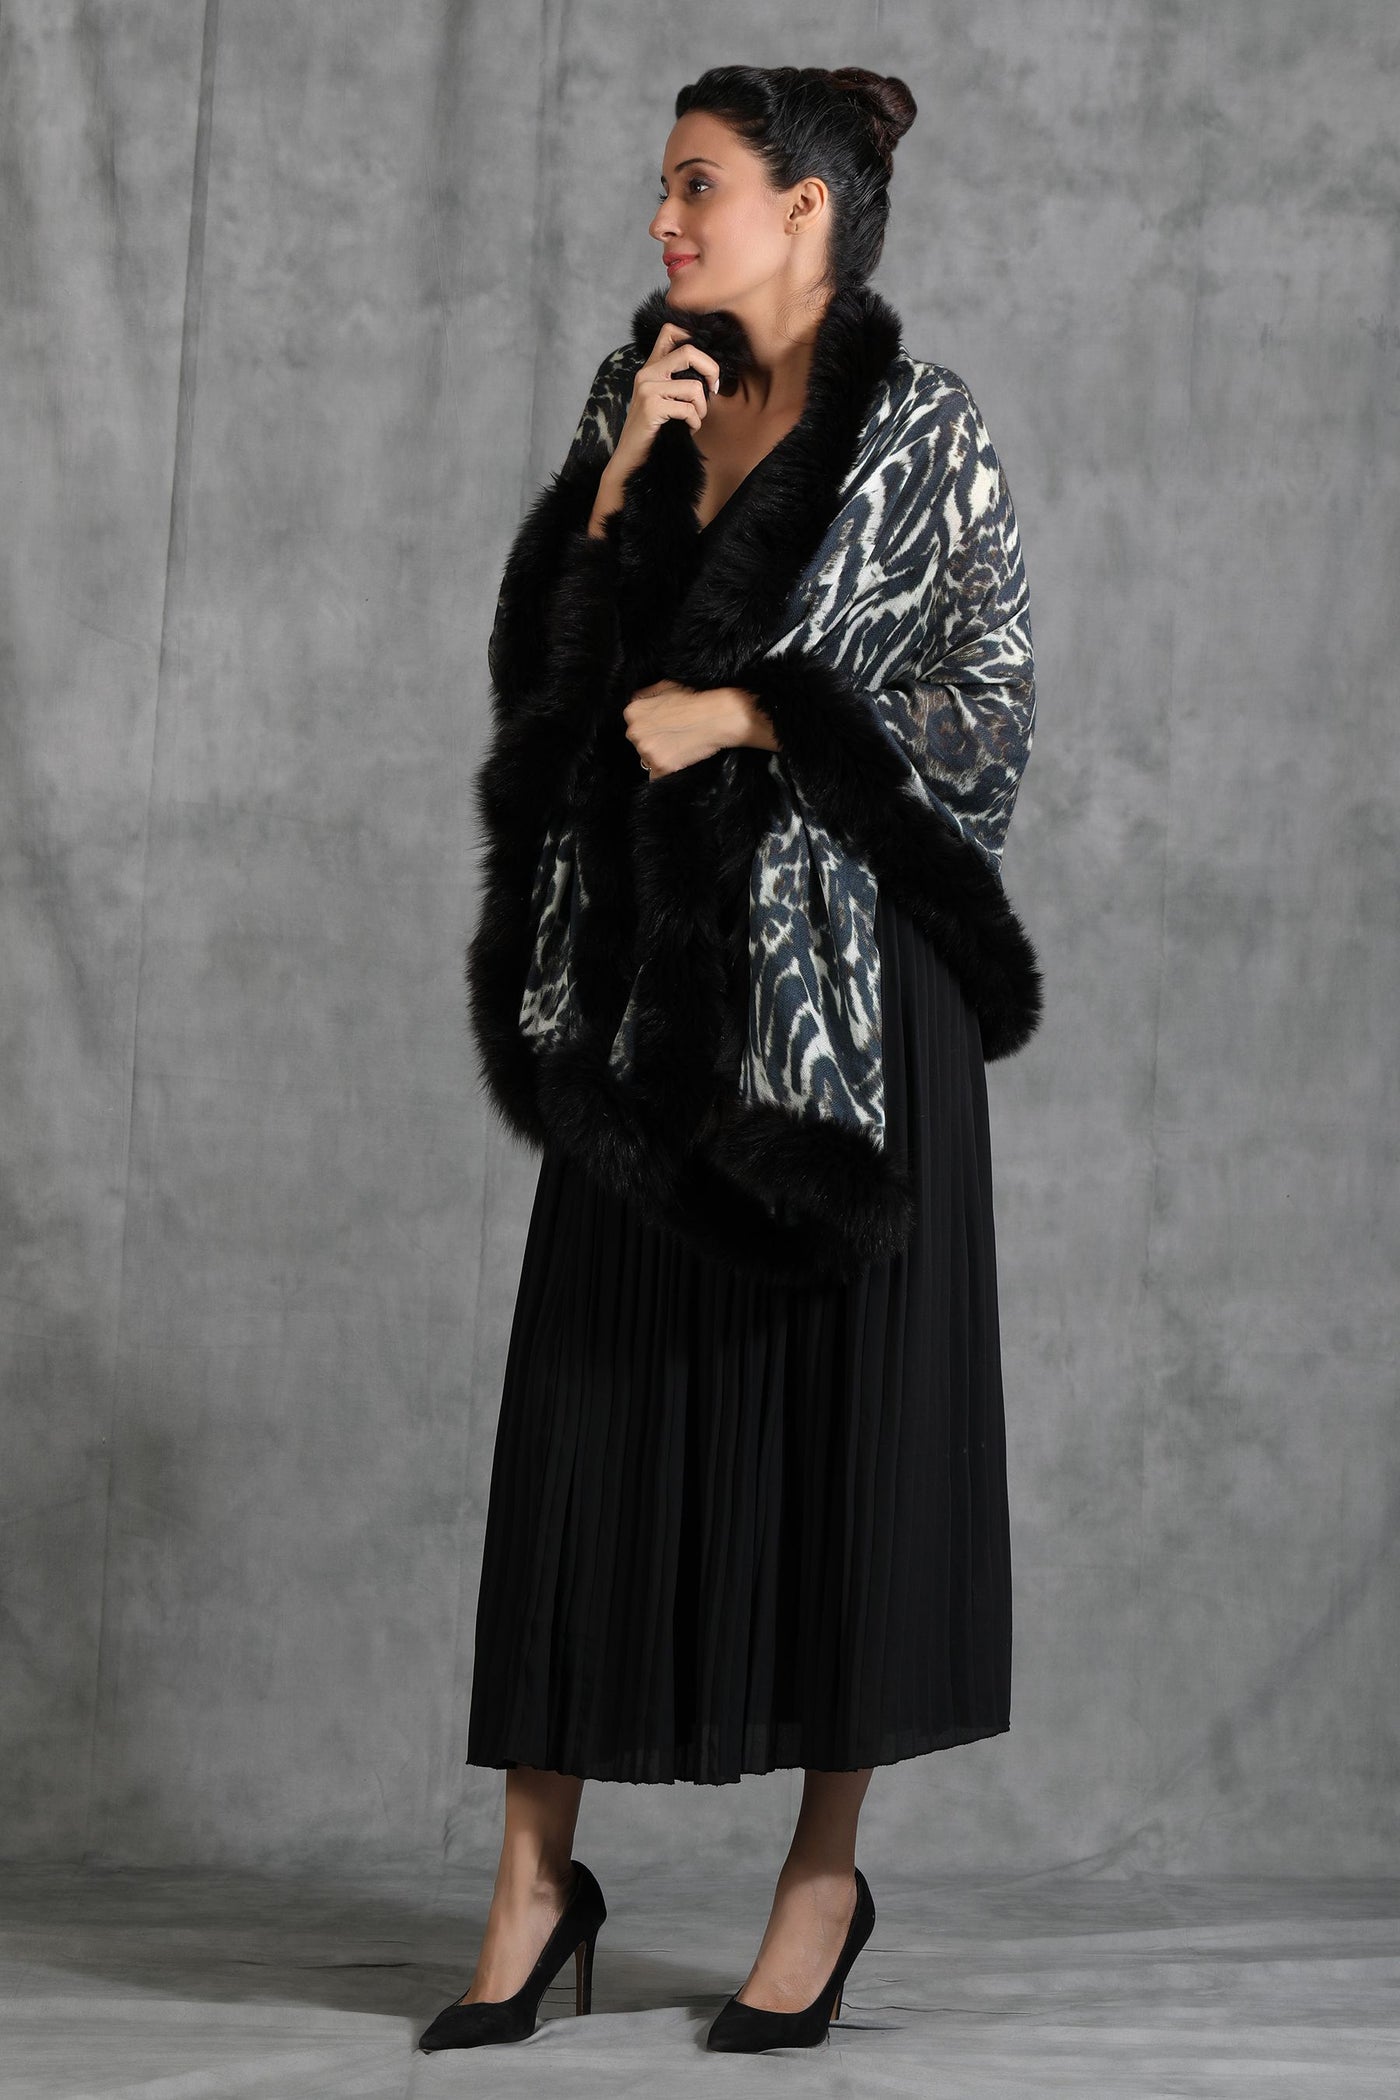 Cashmere Fine Wool Digital Animal Print With High Quality Fur Stole